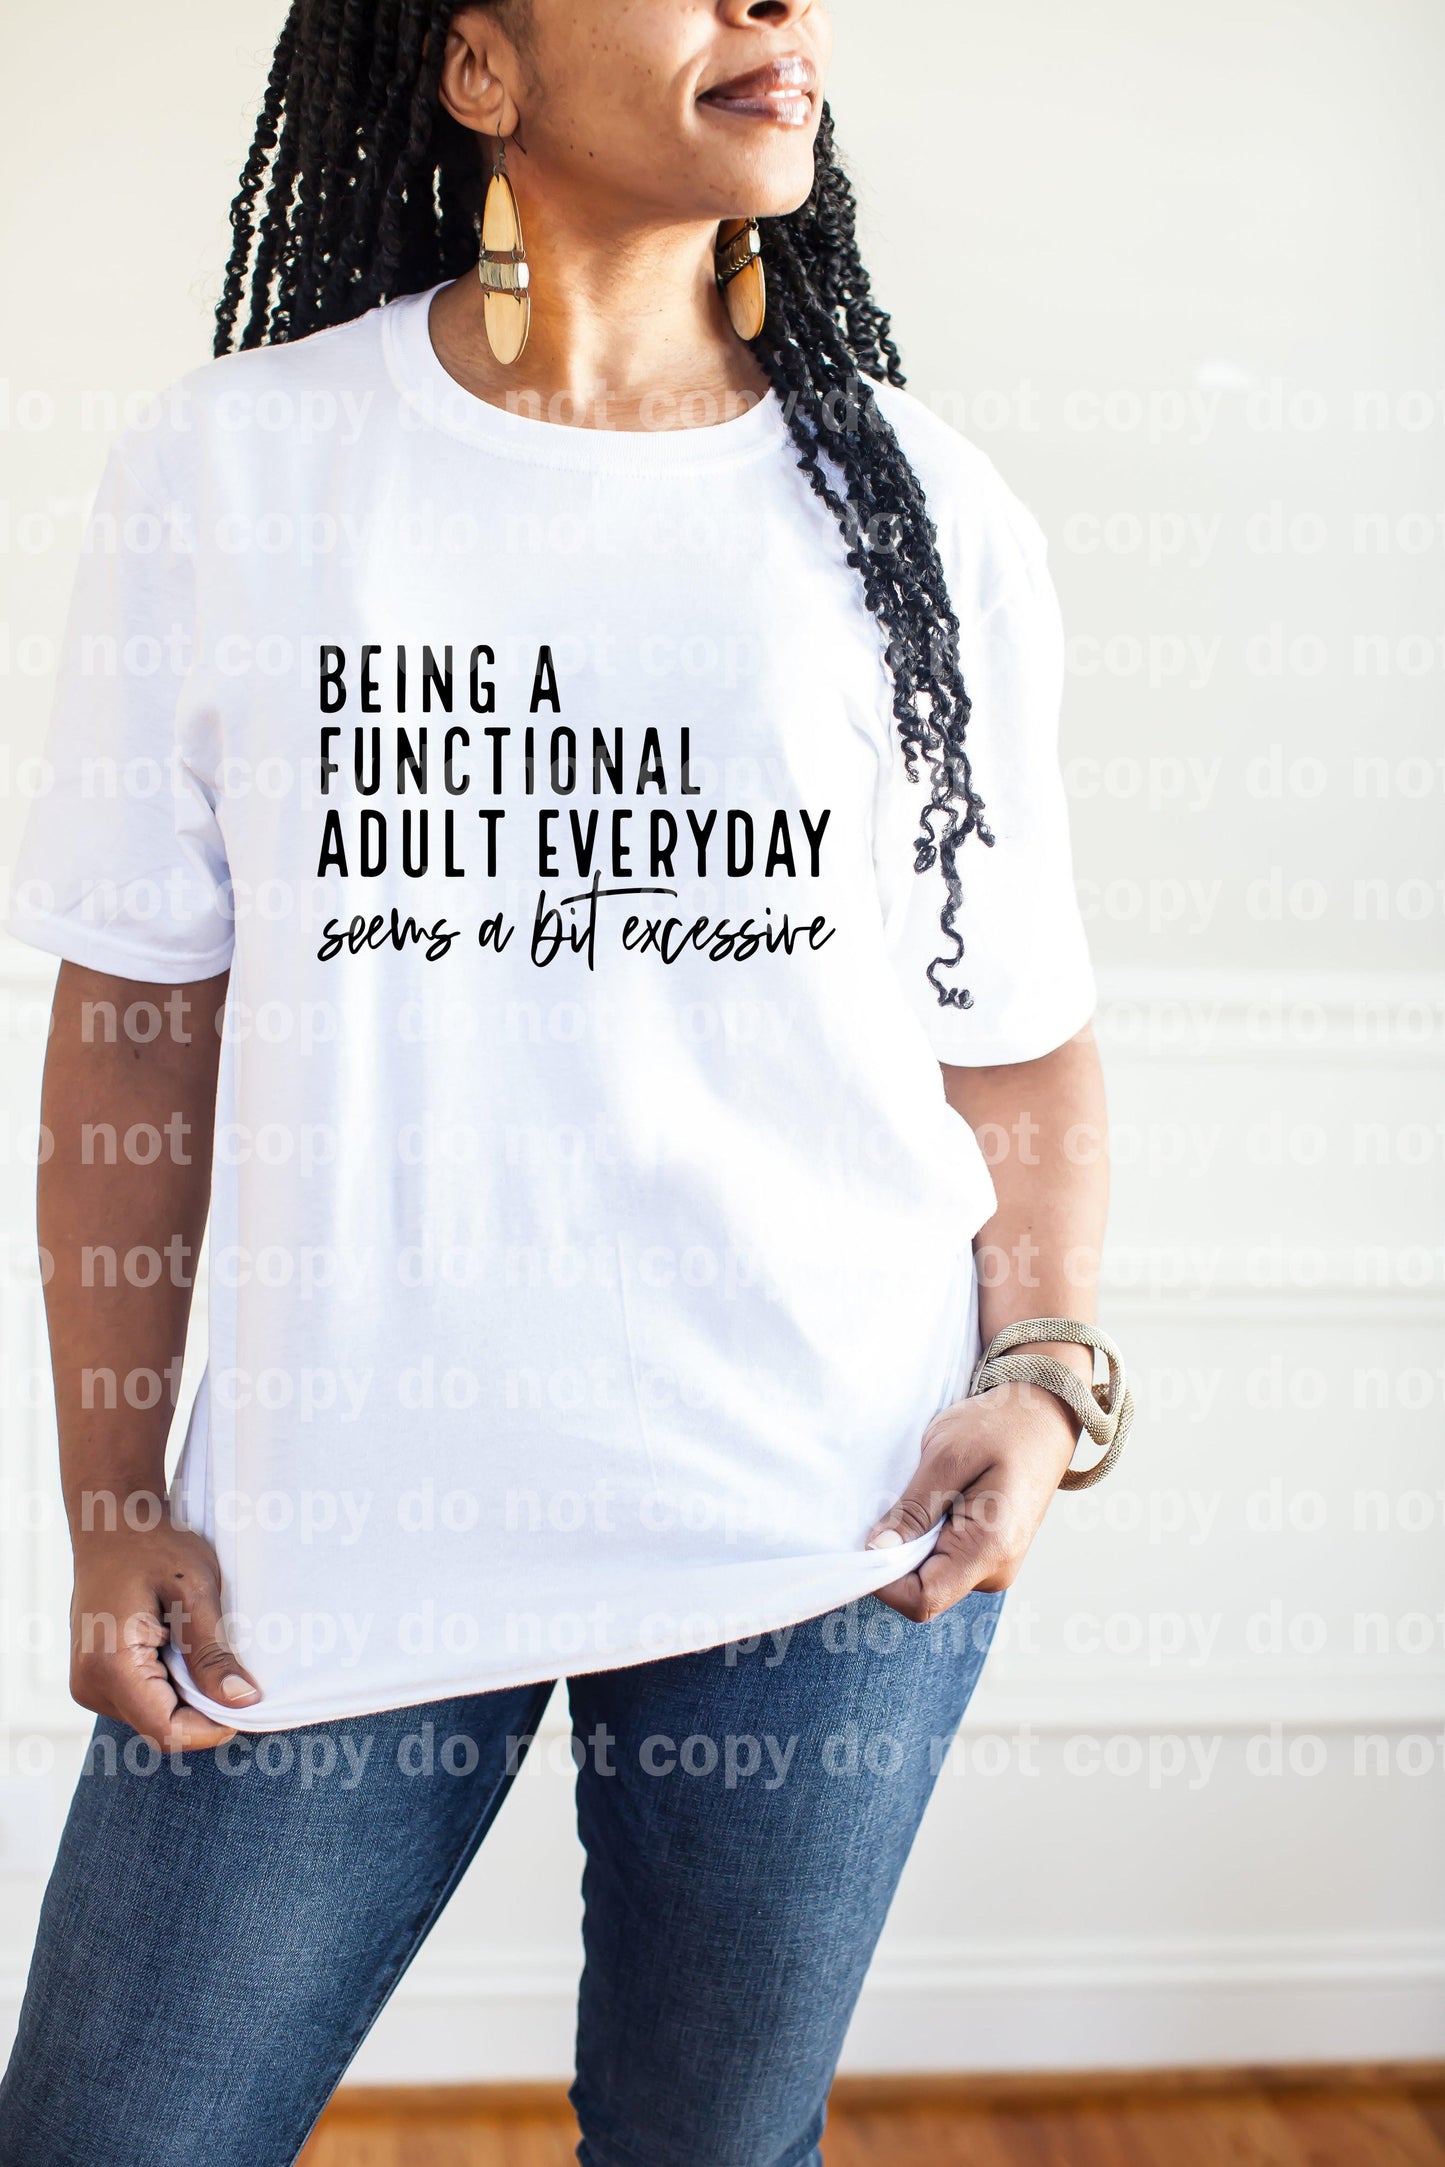 Being a Functional Adult Everyday Seems a Bit Excessive Dream Print or Sublimation Print